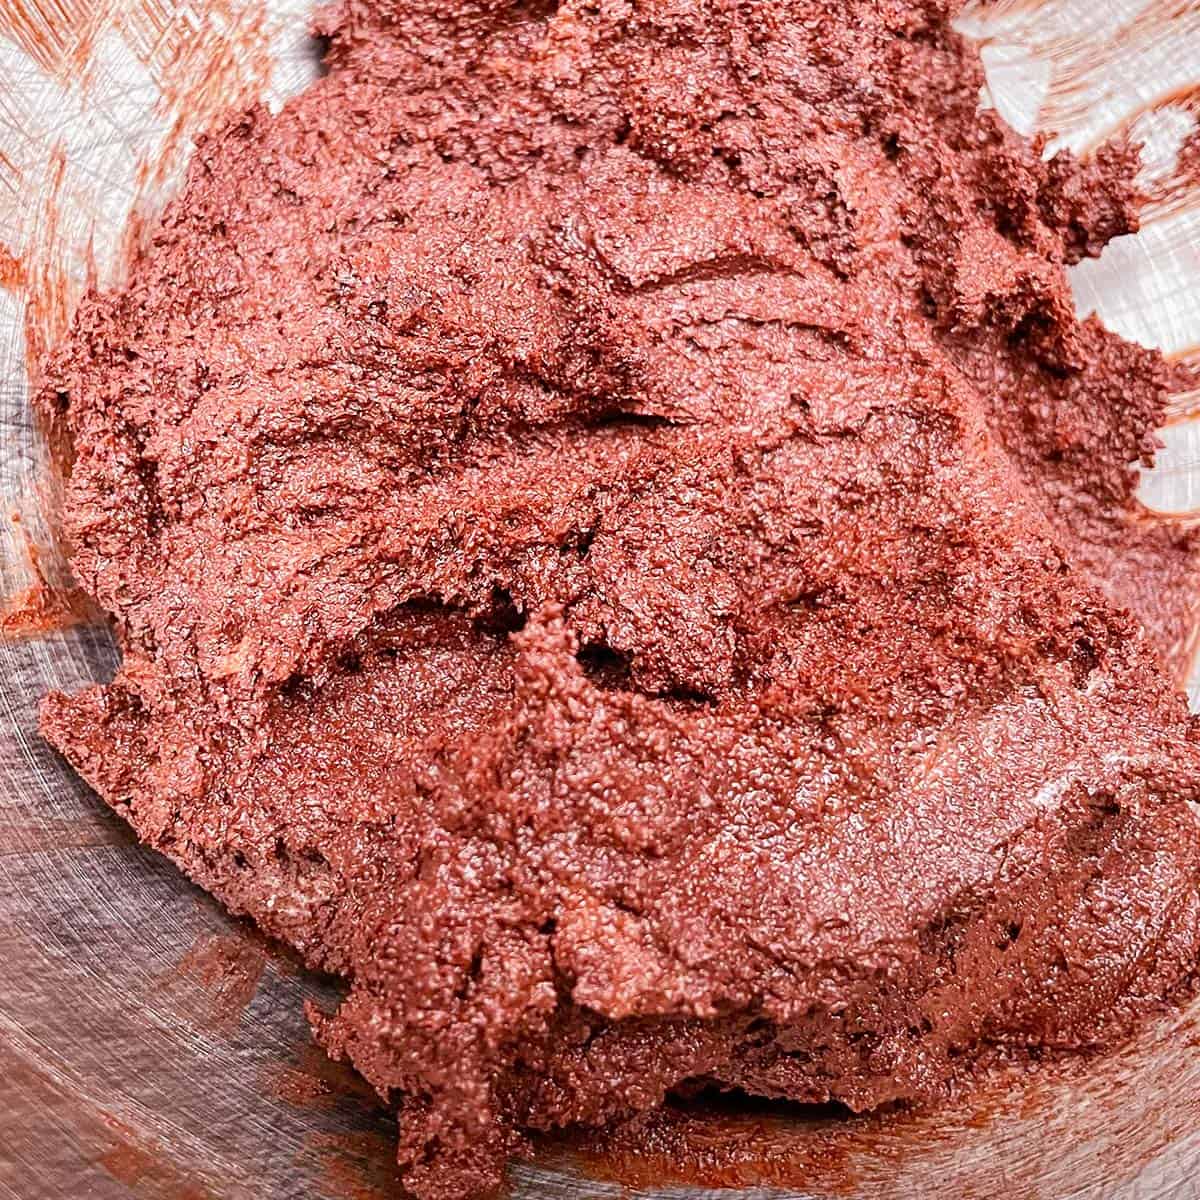 All the ingredients for Mexican Chocolate Crinkle Cookies have been mixed and in the mixer bowl.